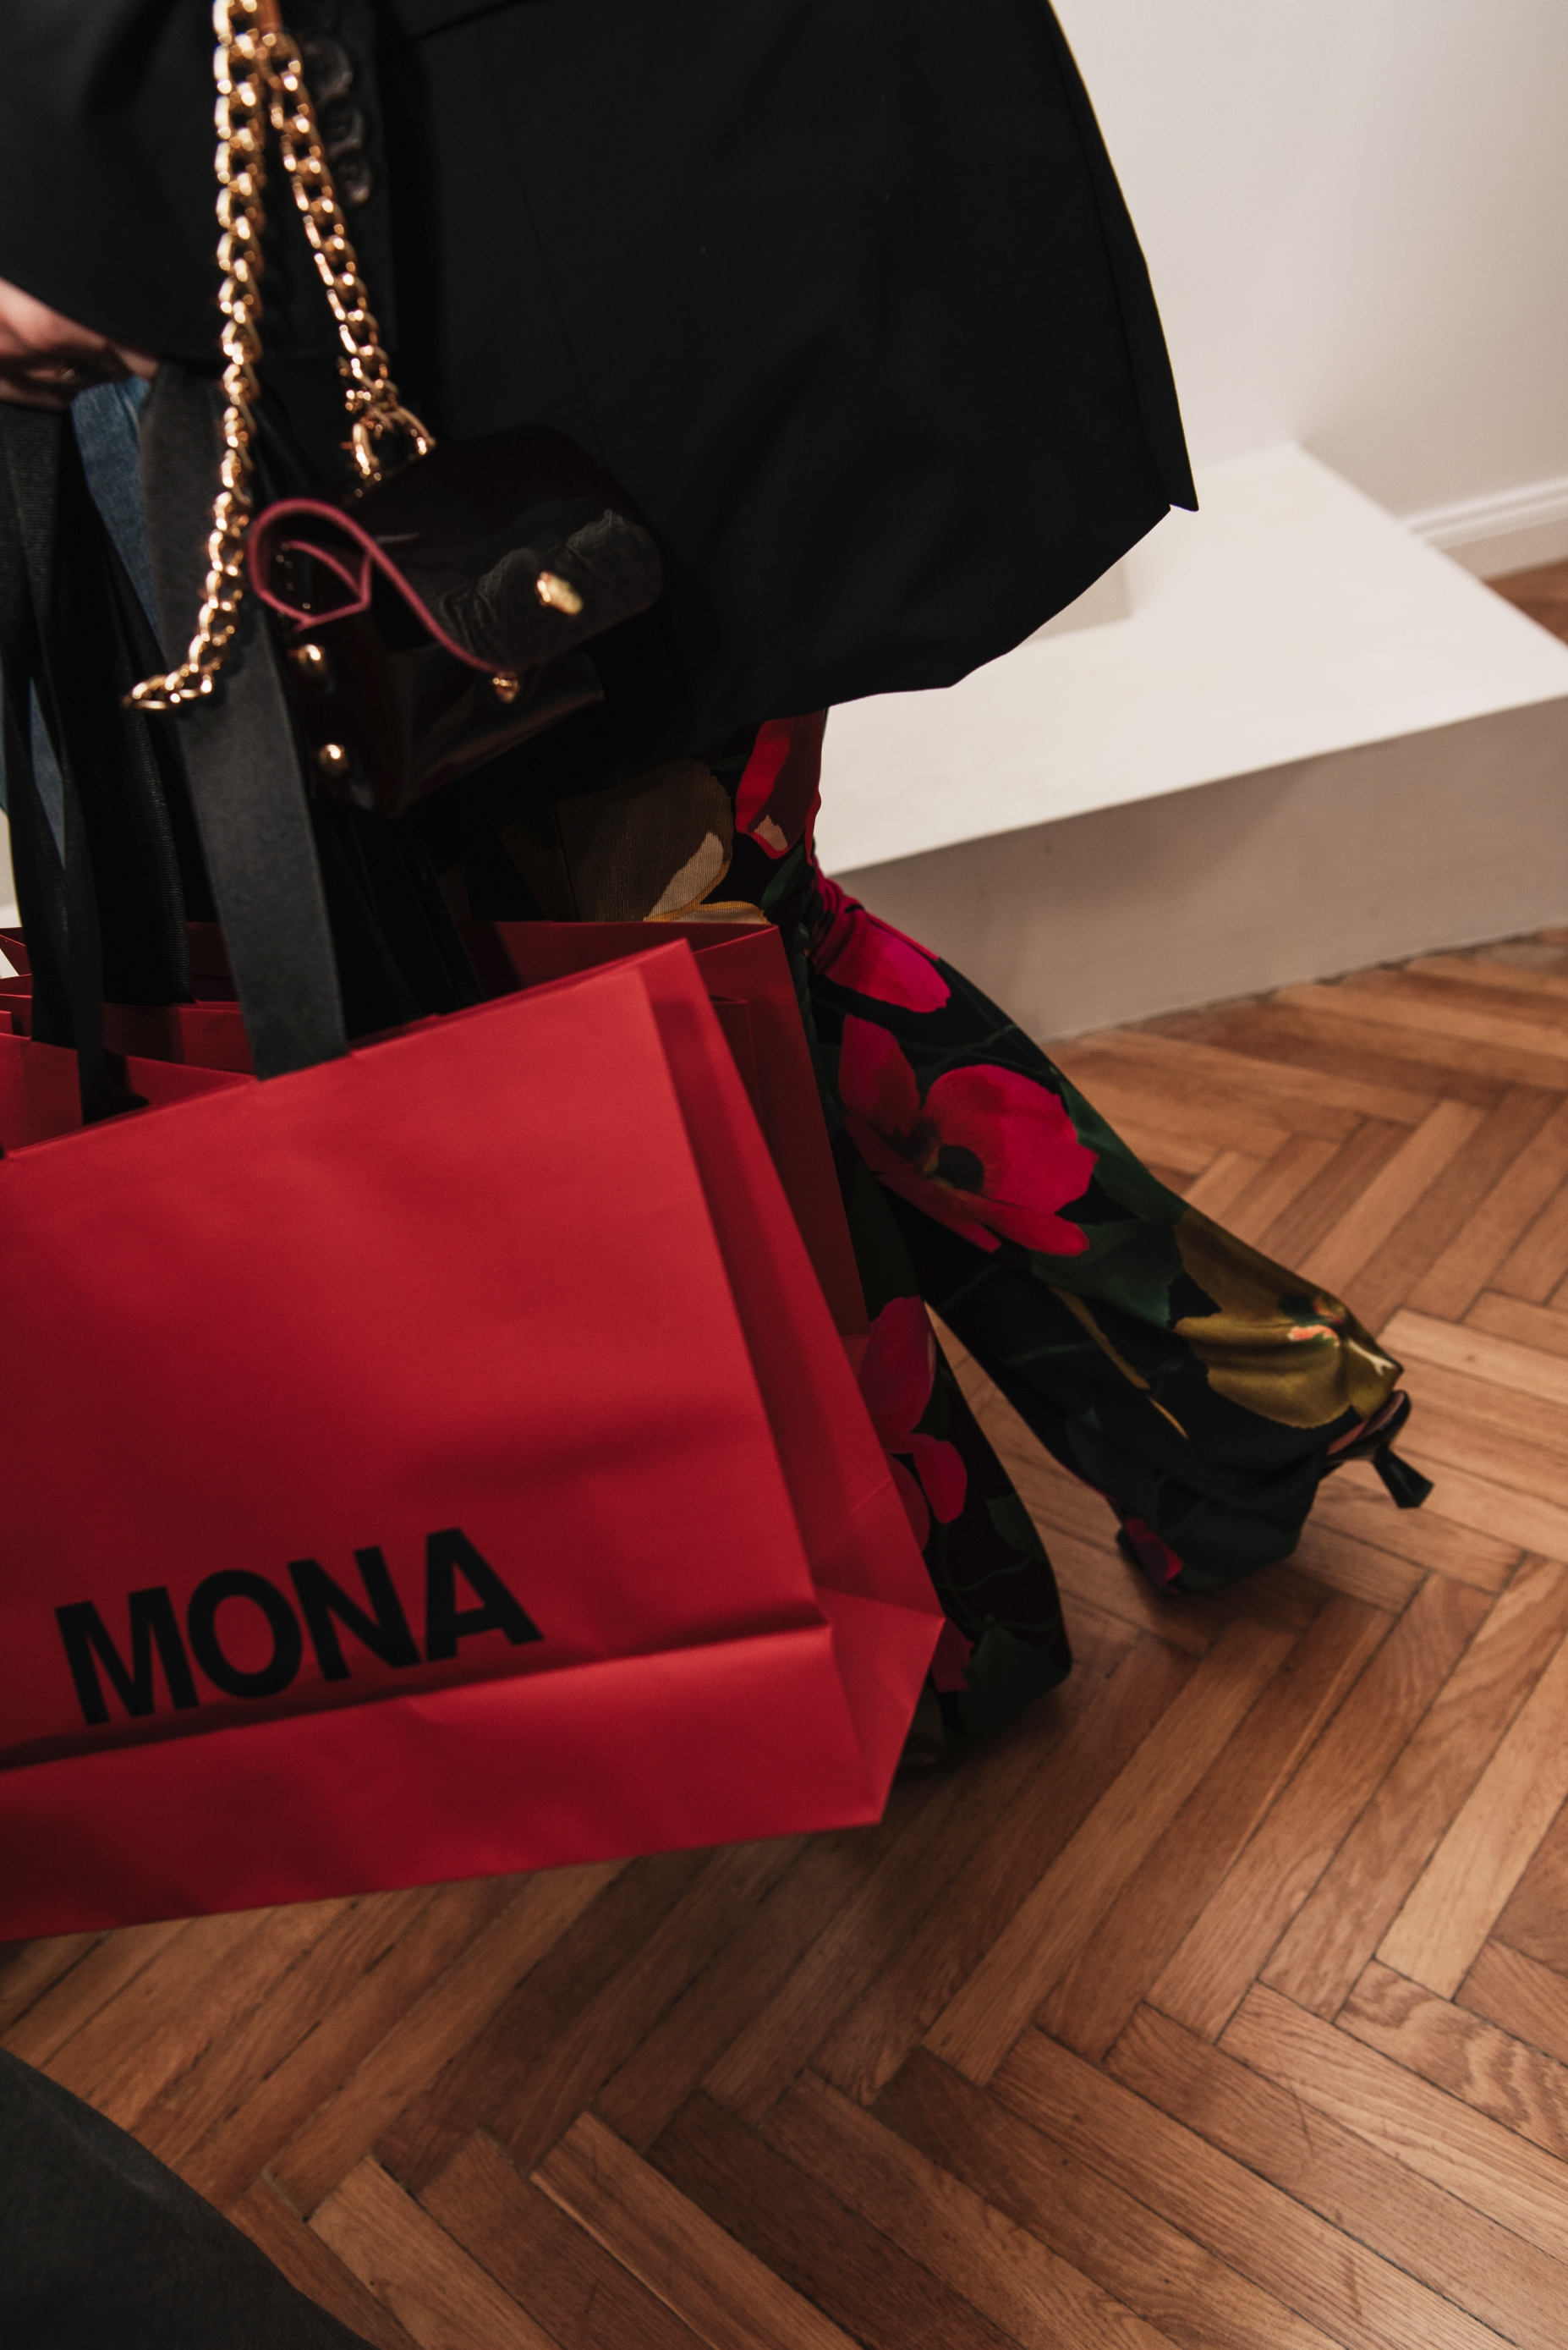 Journal Lifestyle Sessions powered by Mona goody bags (15)